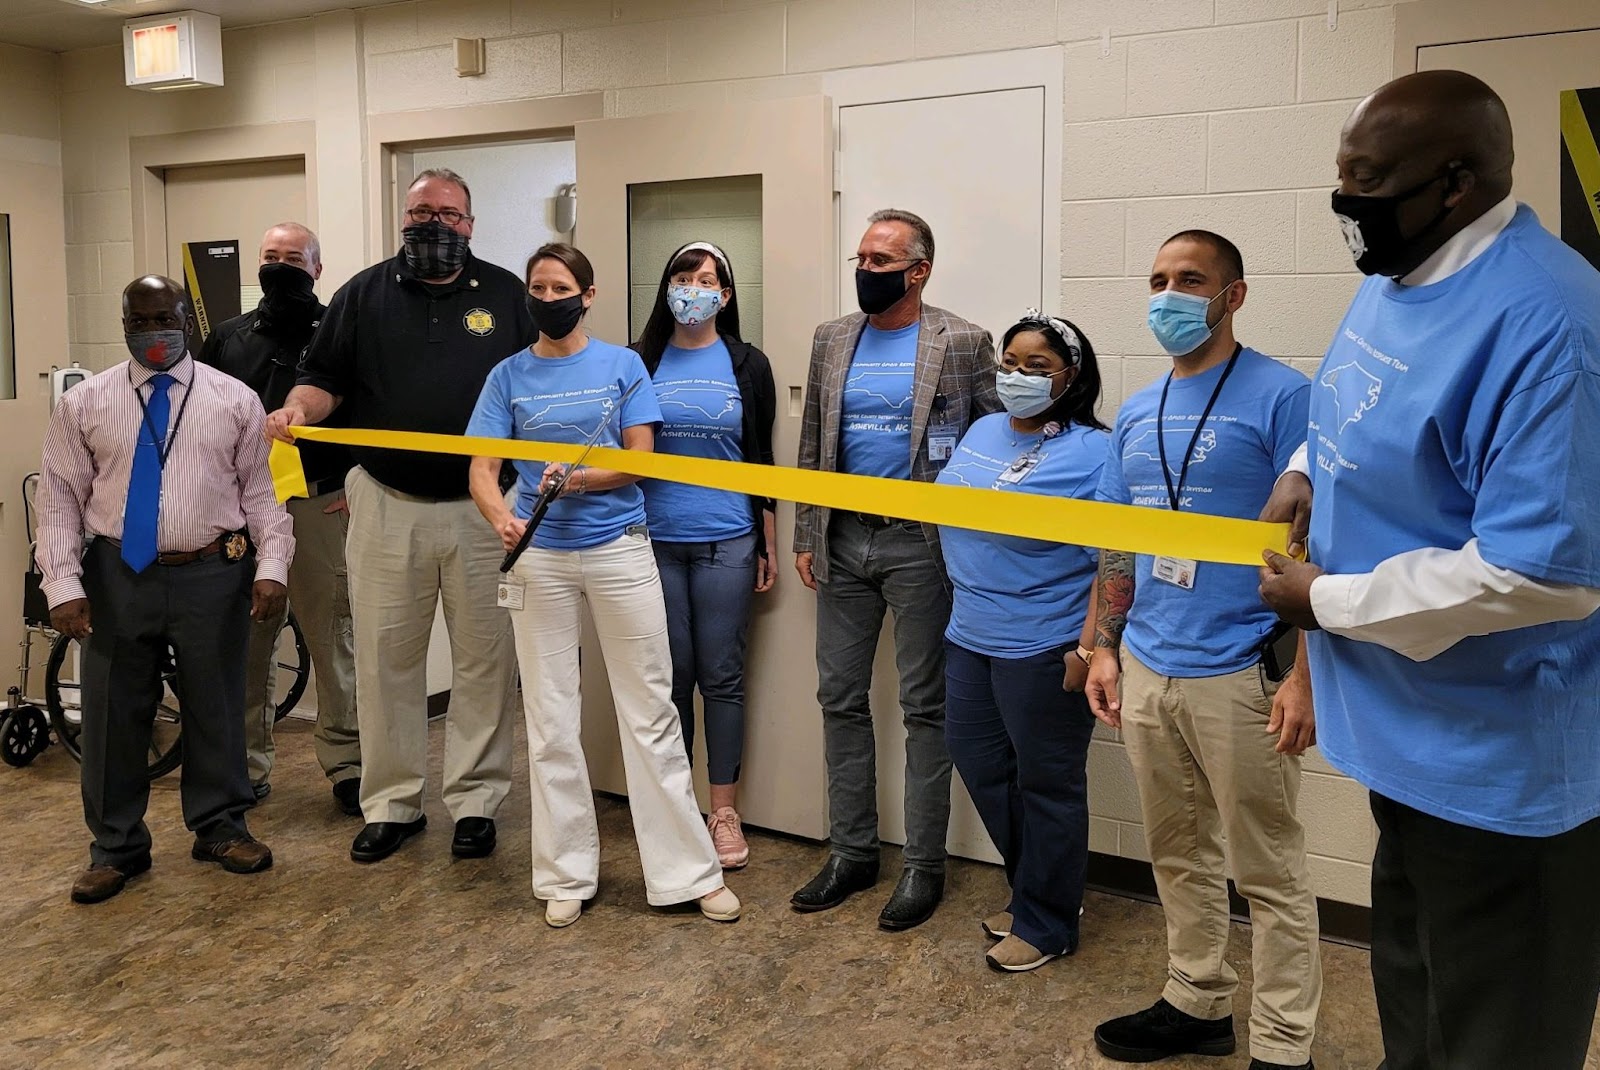 people wearing bright blue t shirts and holding a yellow ribbon and wearing face masks. One woman holds large scissors to mark the start of the jail's medication-assisted treatment program